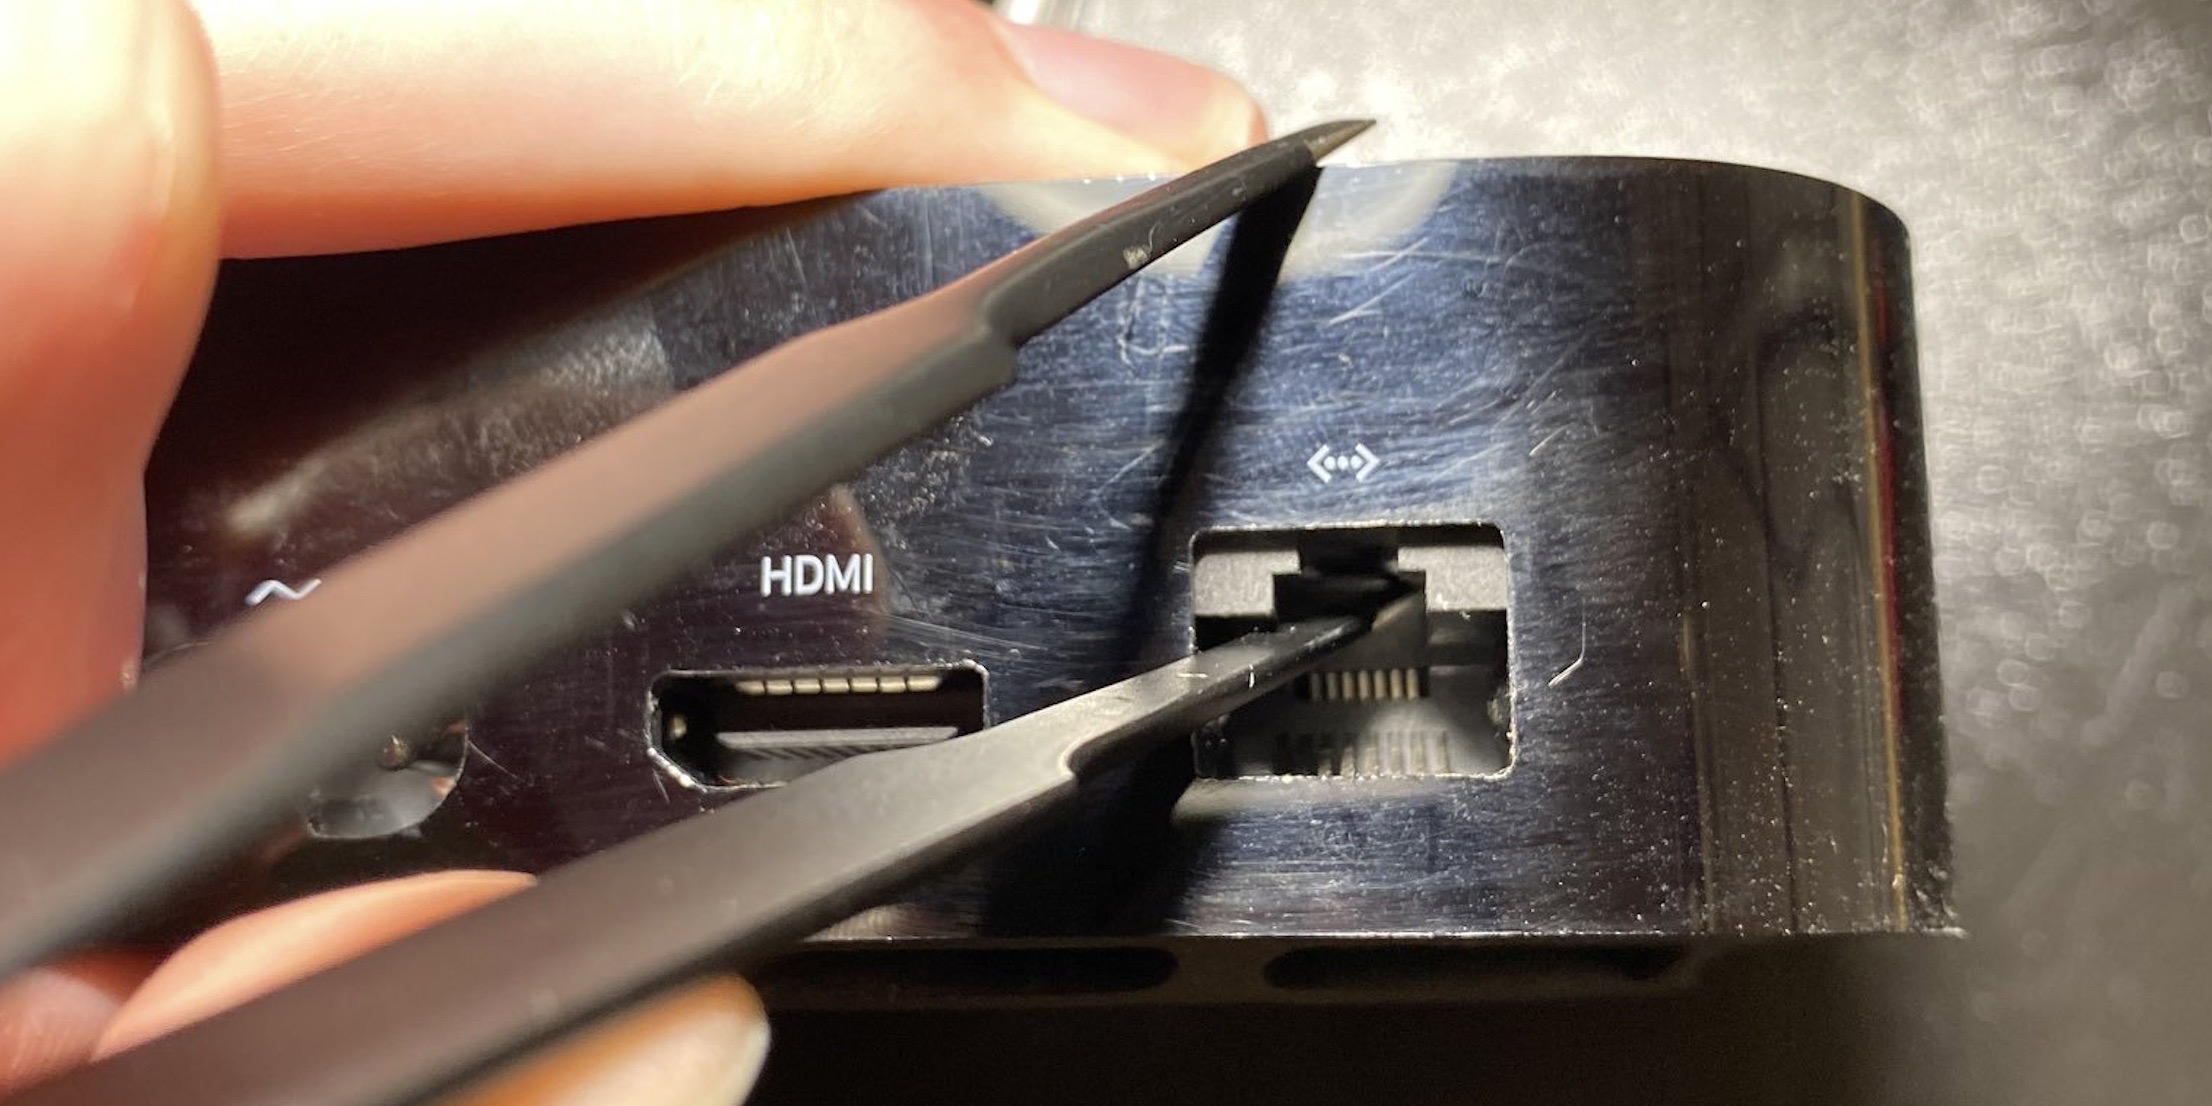 Apple hid a Lightning connector for debugging in the TV 4K's port - 9to5Mac